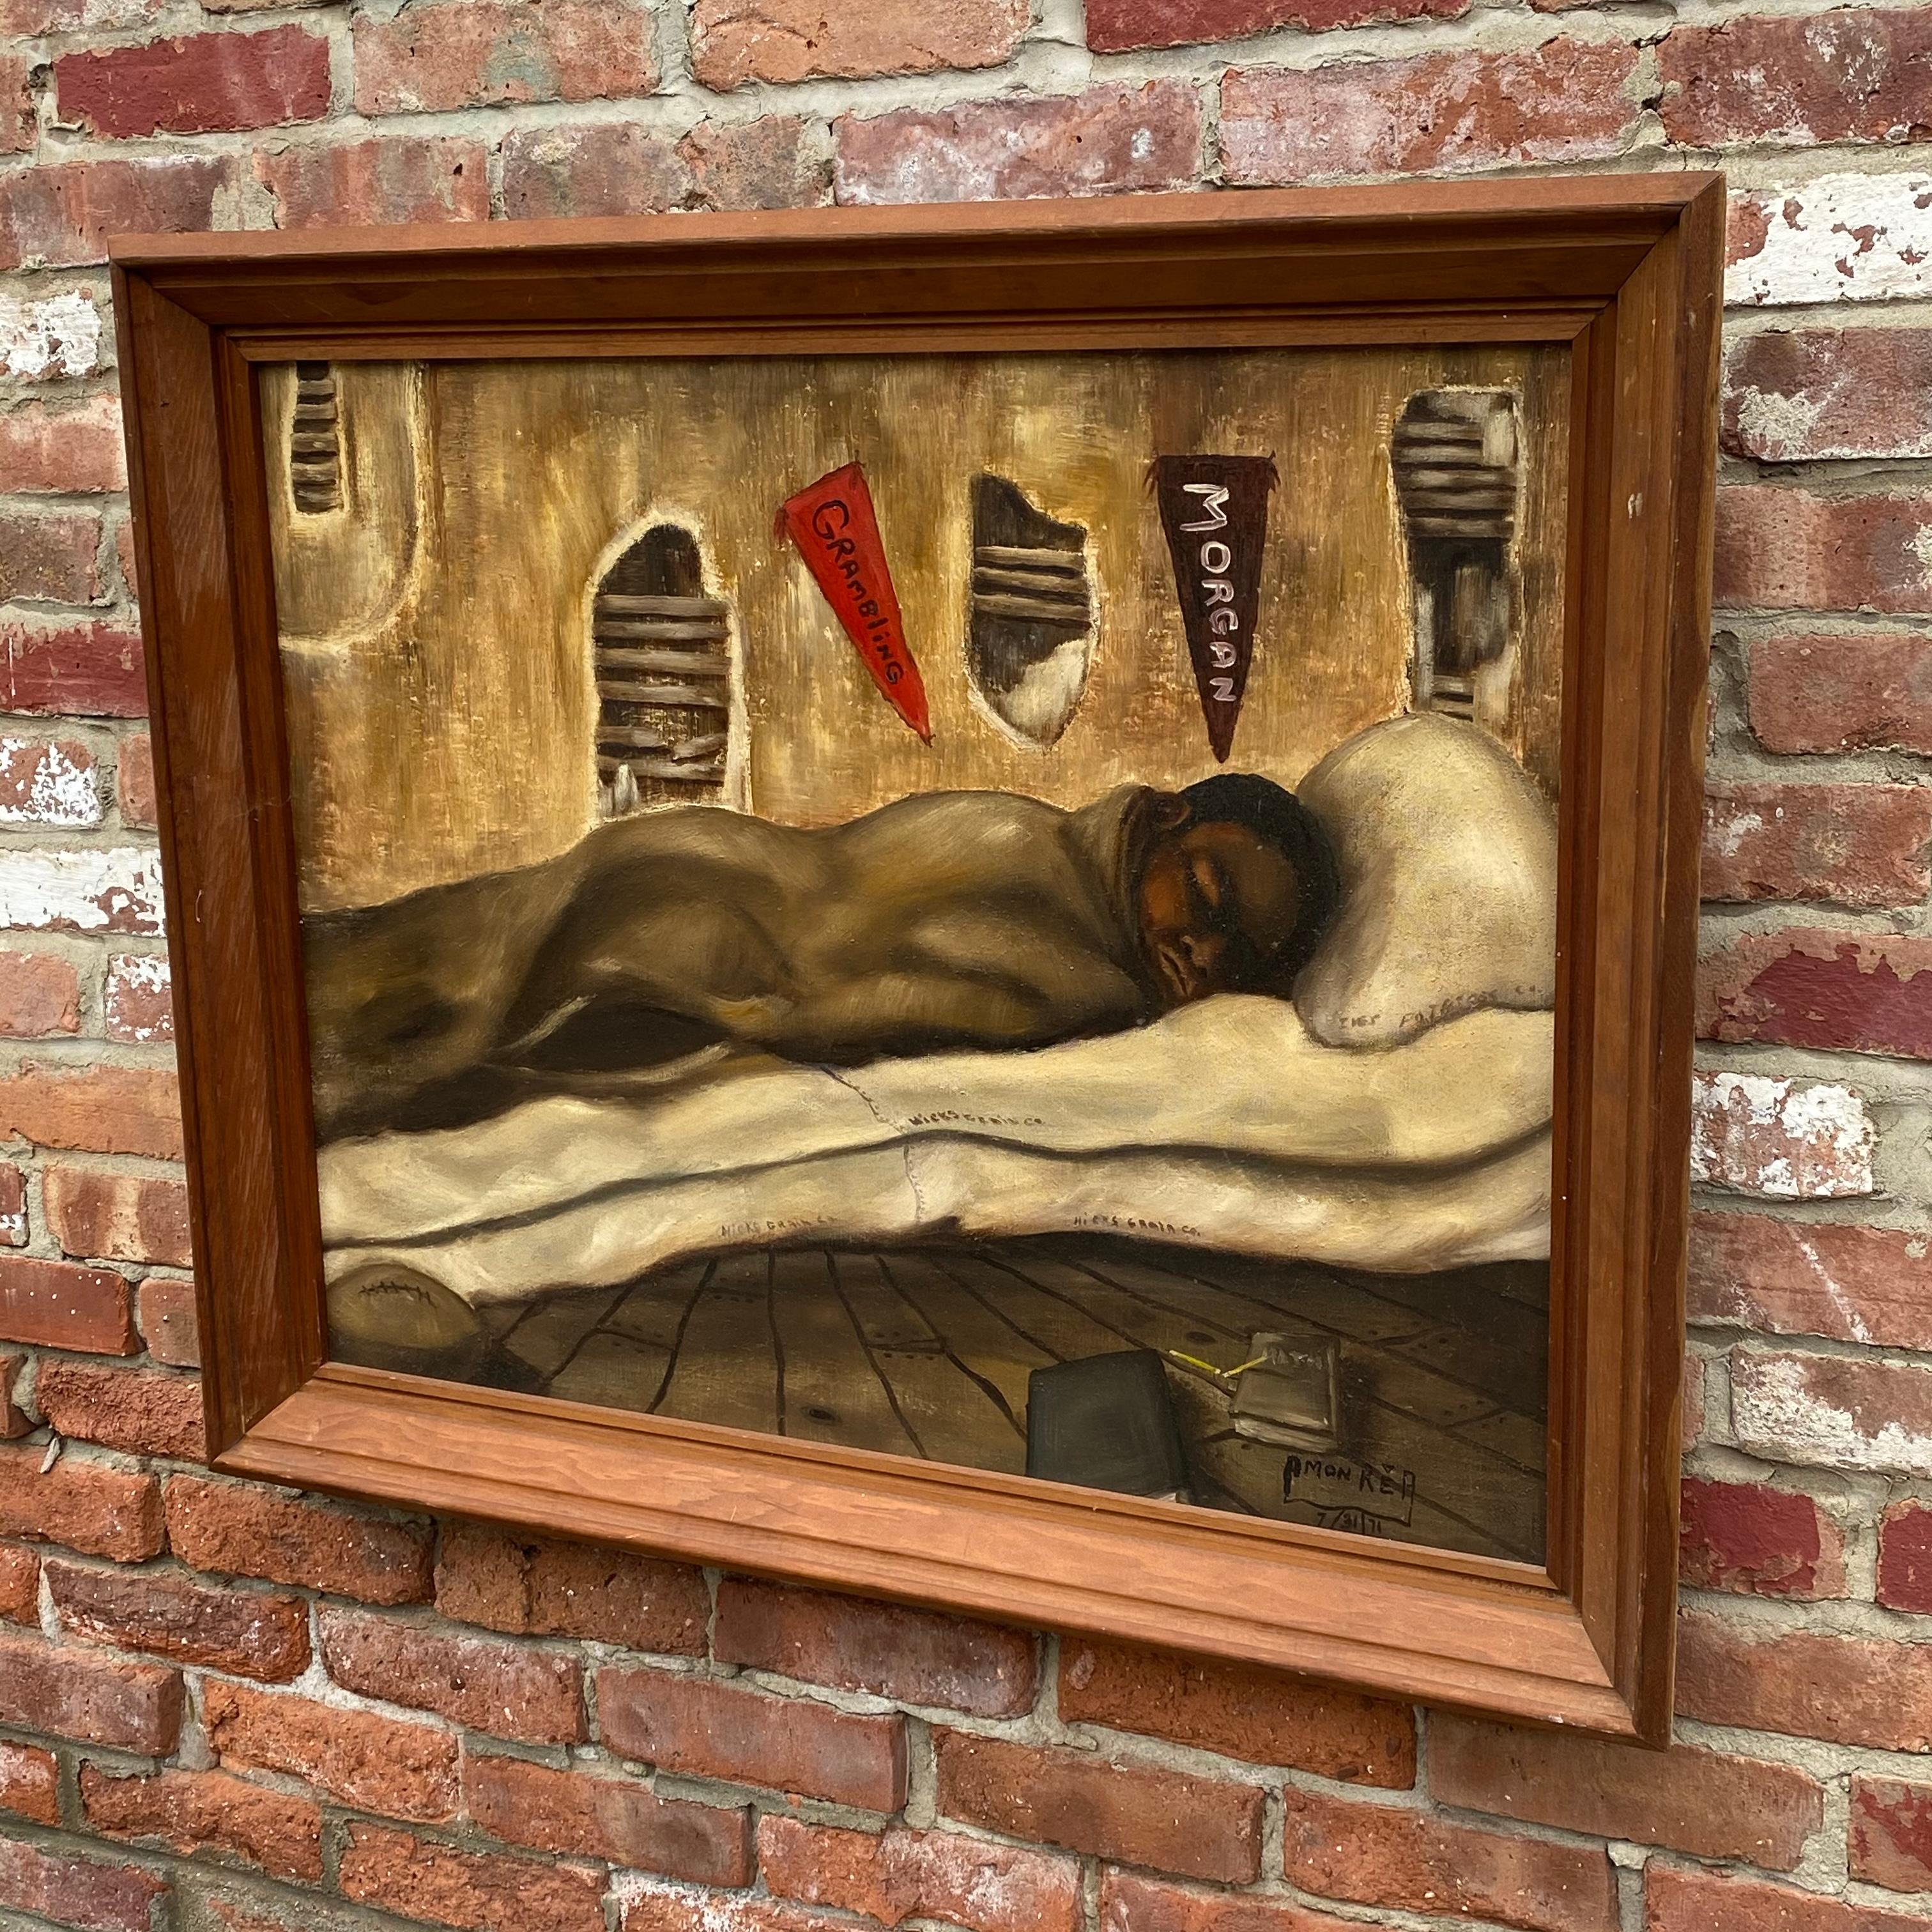 Titled Only A Few Hours Away painting by Amon Rea. Wonderful rendering of the aspirational dreams of a young black child set in an extremely modest setting; plaster bare wall with exposed lathe and a very lumpy mattress. Sleeping the sleep of the